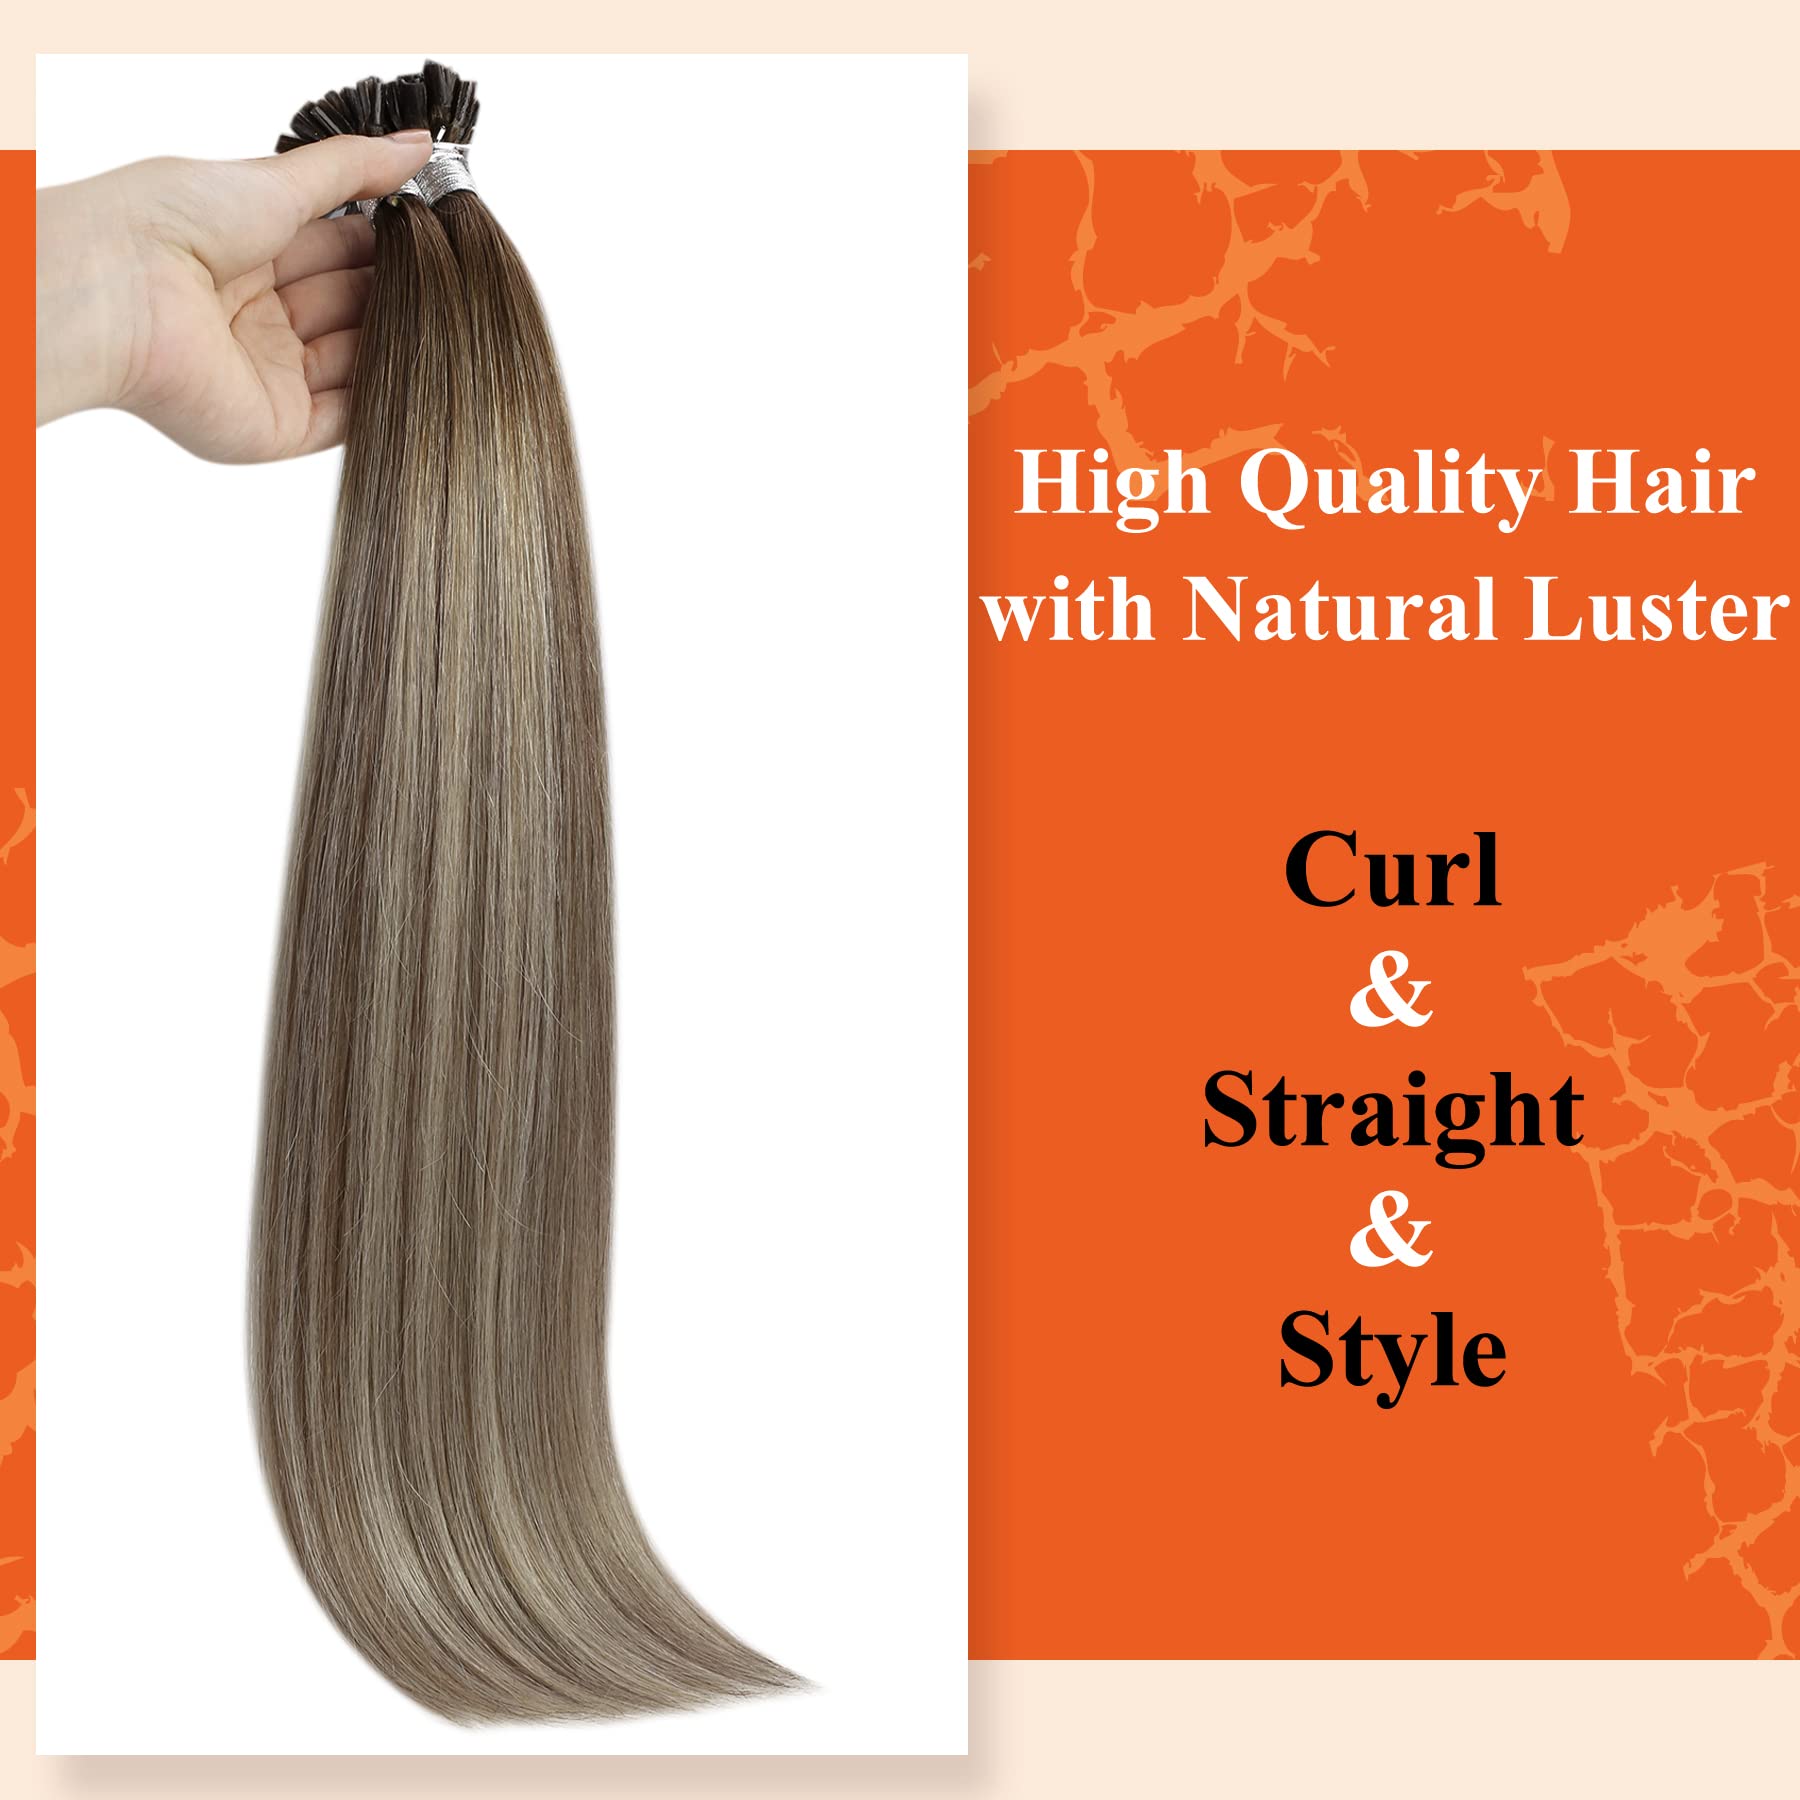 Full Shine Utip Hair Extensions Human Hair 14 Inch Balayage Color 3 Fading to 8 and 22 Light Blonde Pre Bonded Hair Extensions 0.8g Per Strand 50 Strands U Tip Extensions